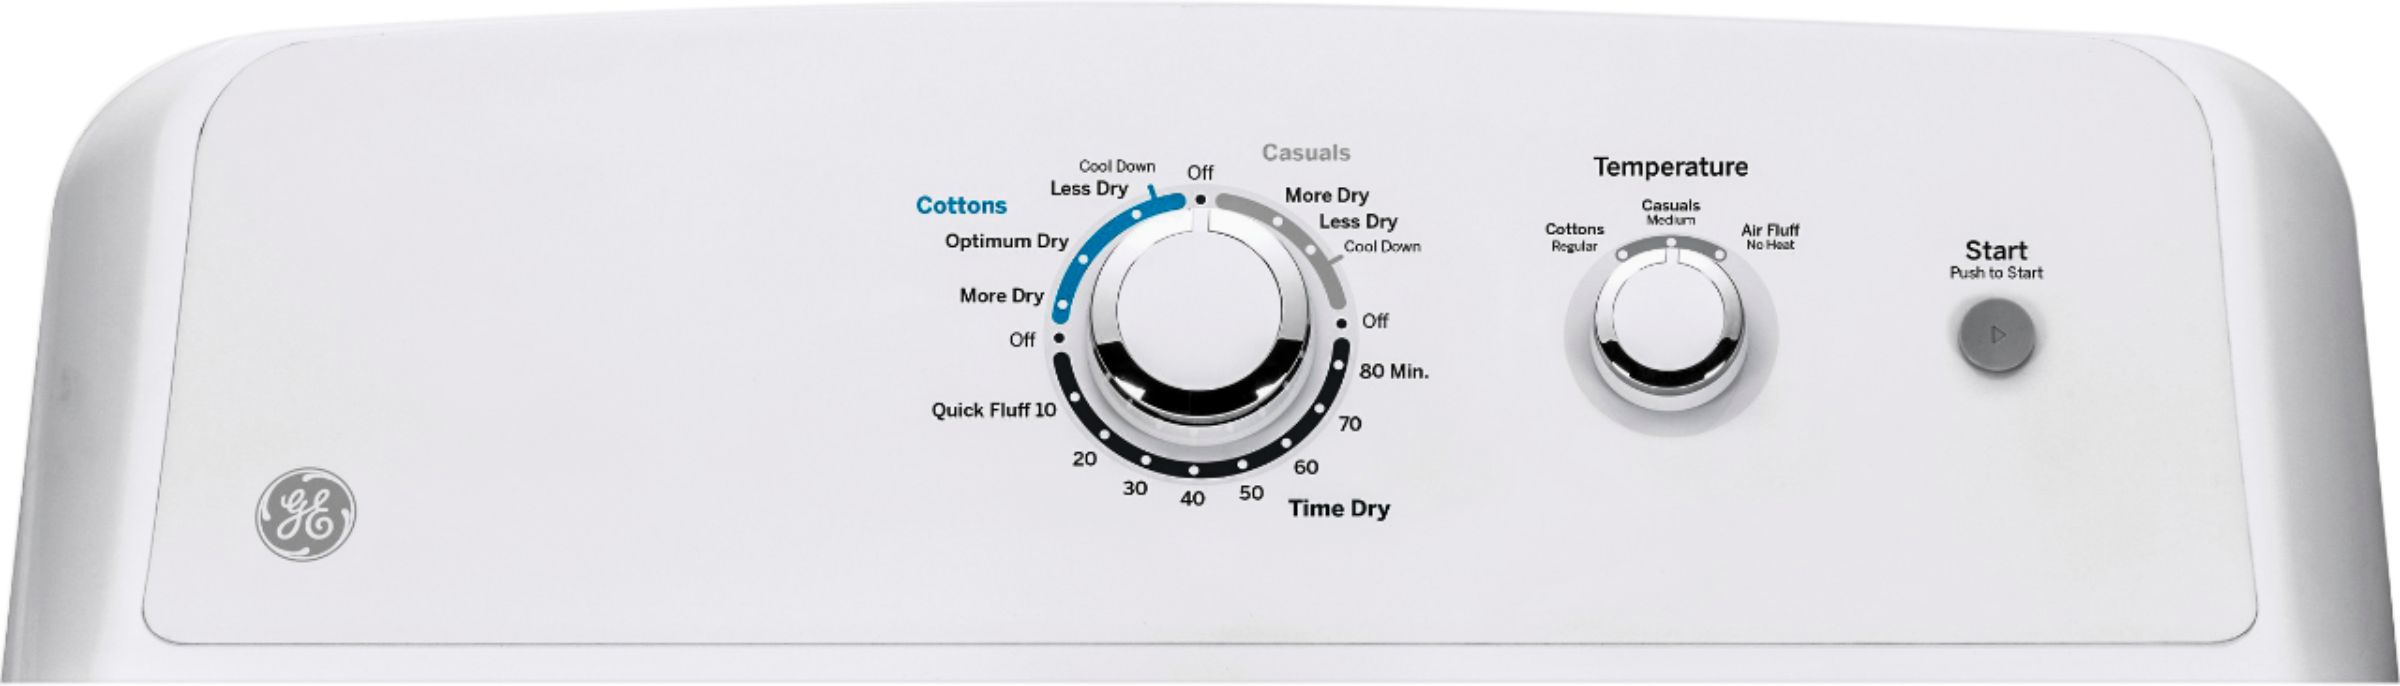 Angle View: GE - 7.2 Cu. Ft. Gas Dryer - White